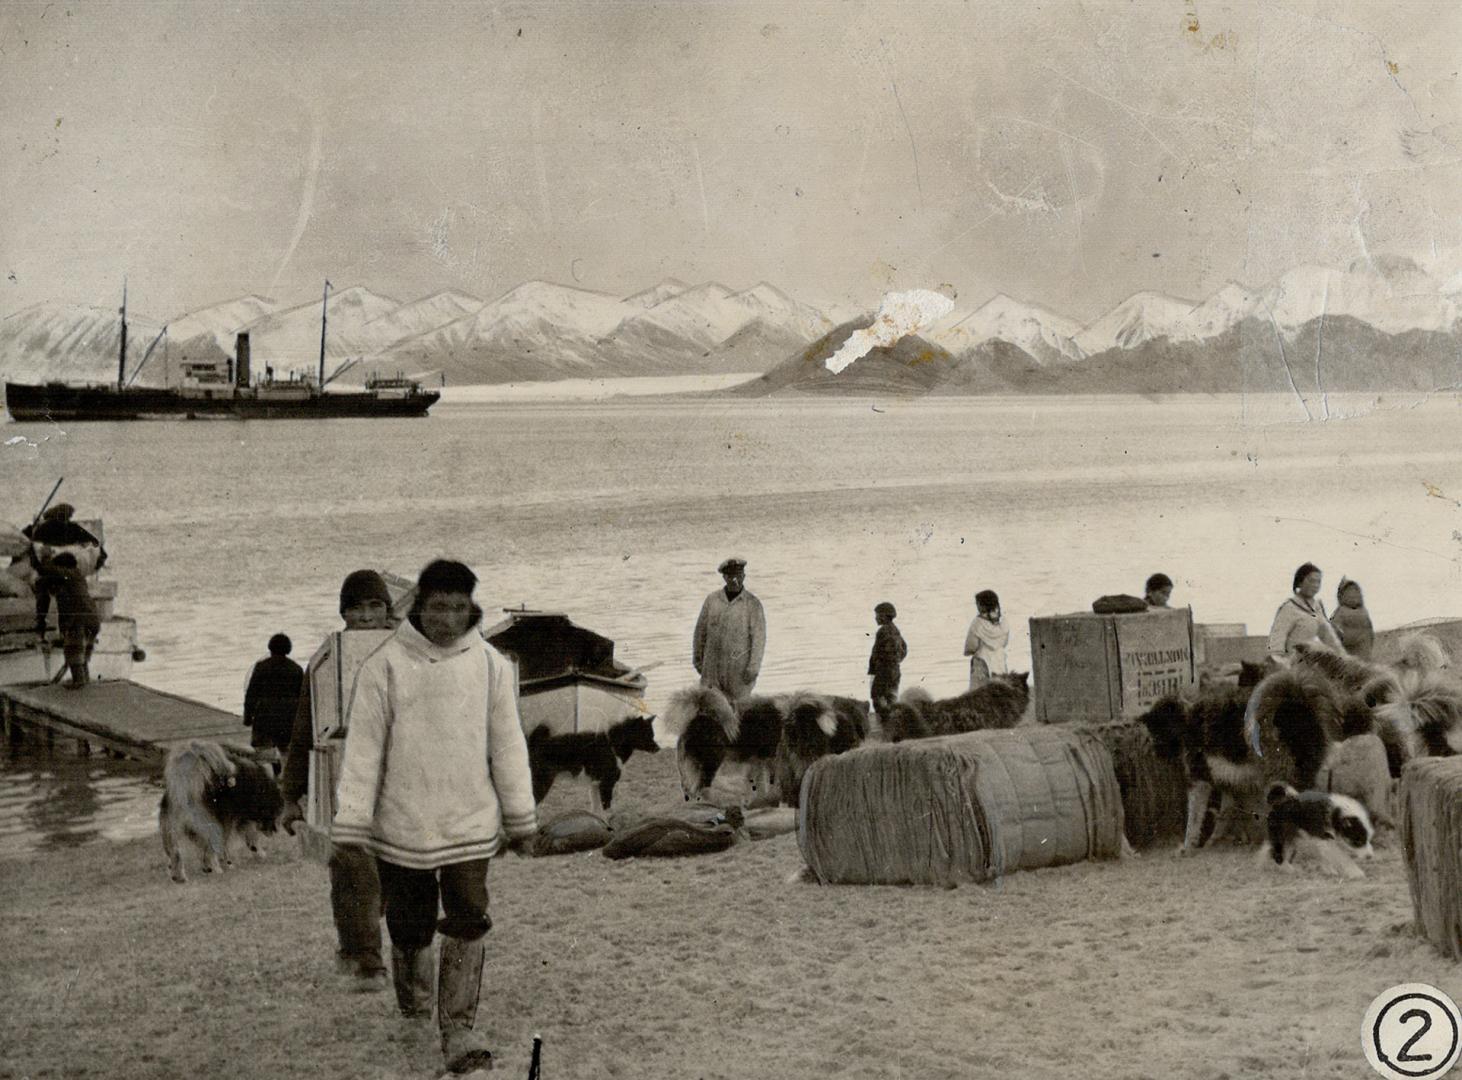 Supplies being landed from the Nascopie which is seen in the left background